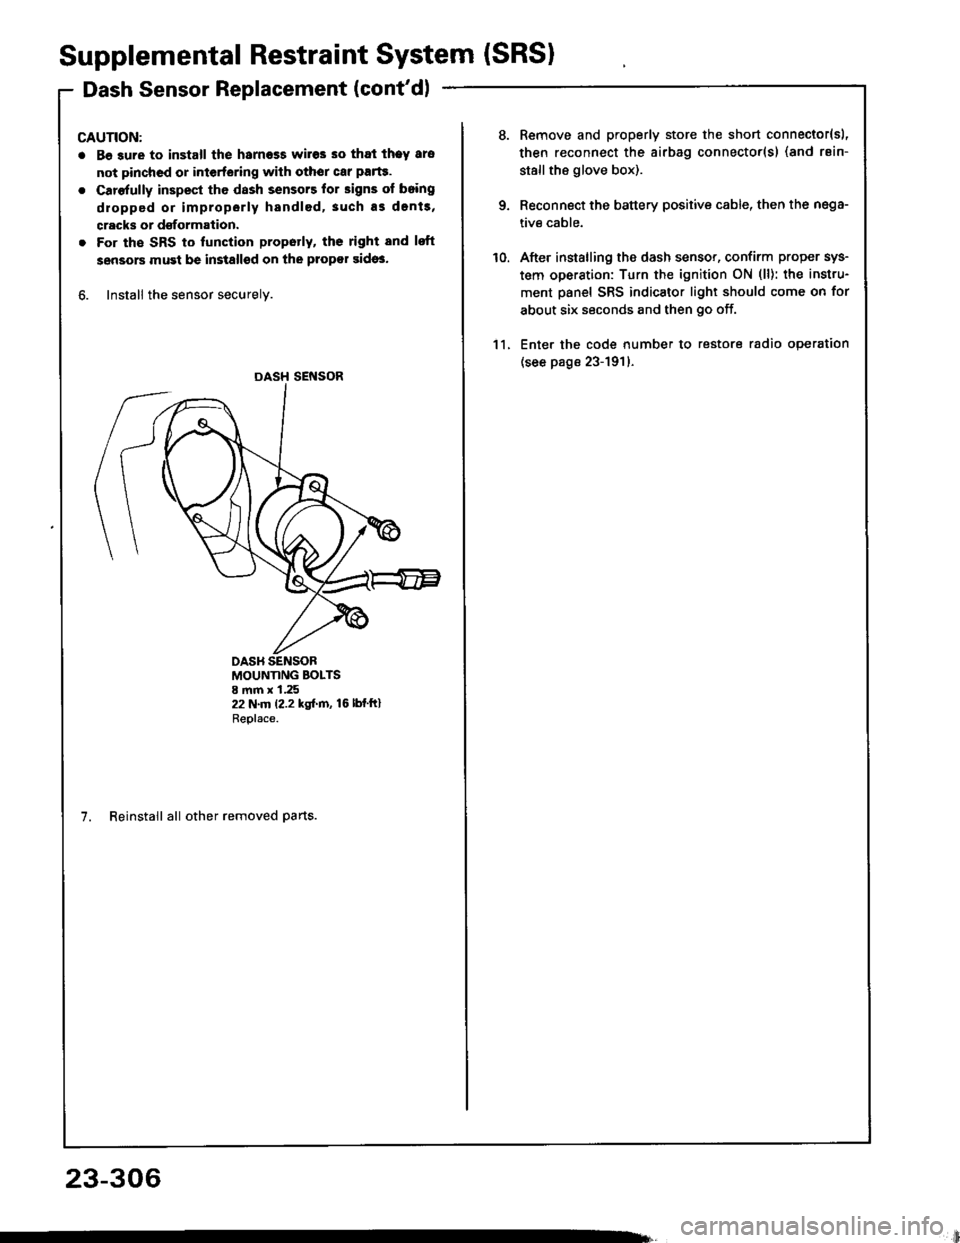 HONDA INTEGRA 1994 4.G Workshop Manual Supplemental Restraint System (SRSI
Dash Sensor Replacement (contdl
CAUTION:
. Be 3ure to install the harness wires so that theY ars
not pinchcd or interfering with othor car parte.
o Carefully inspe